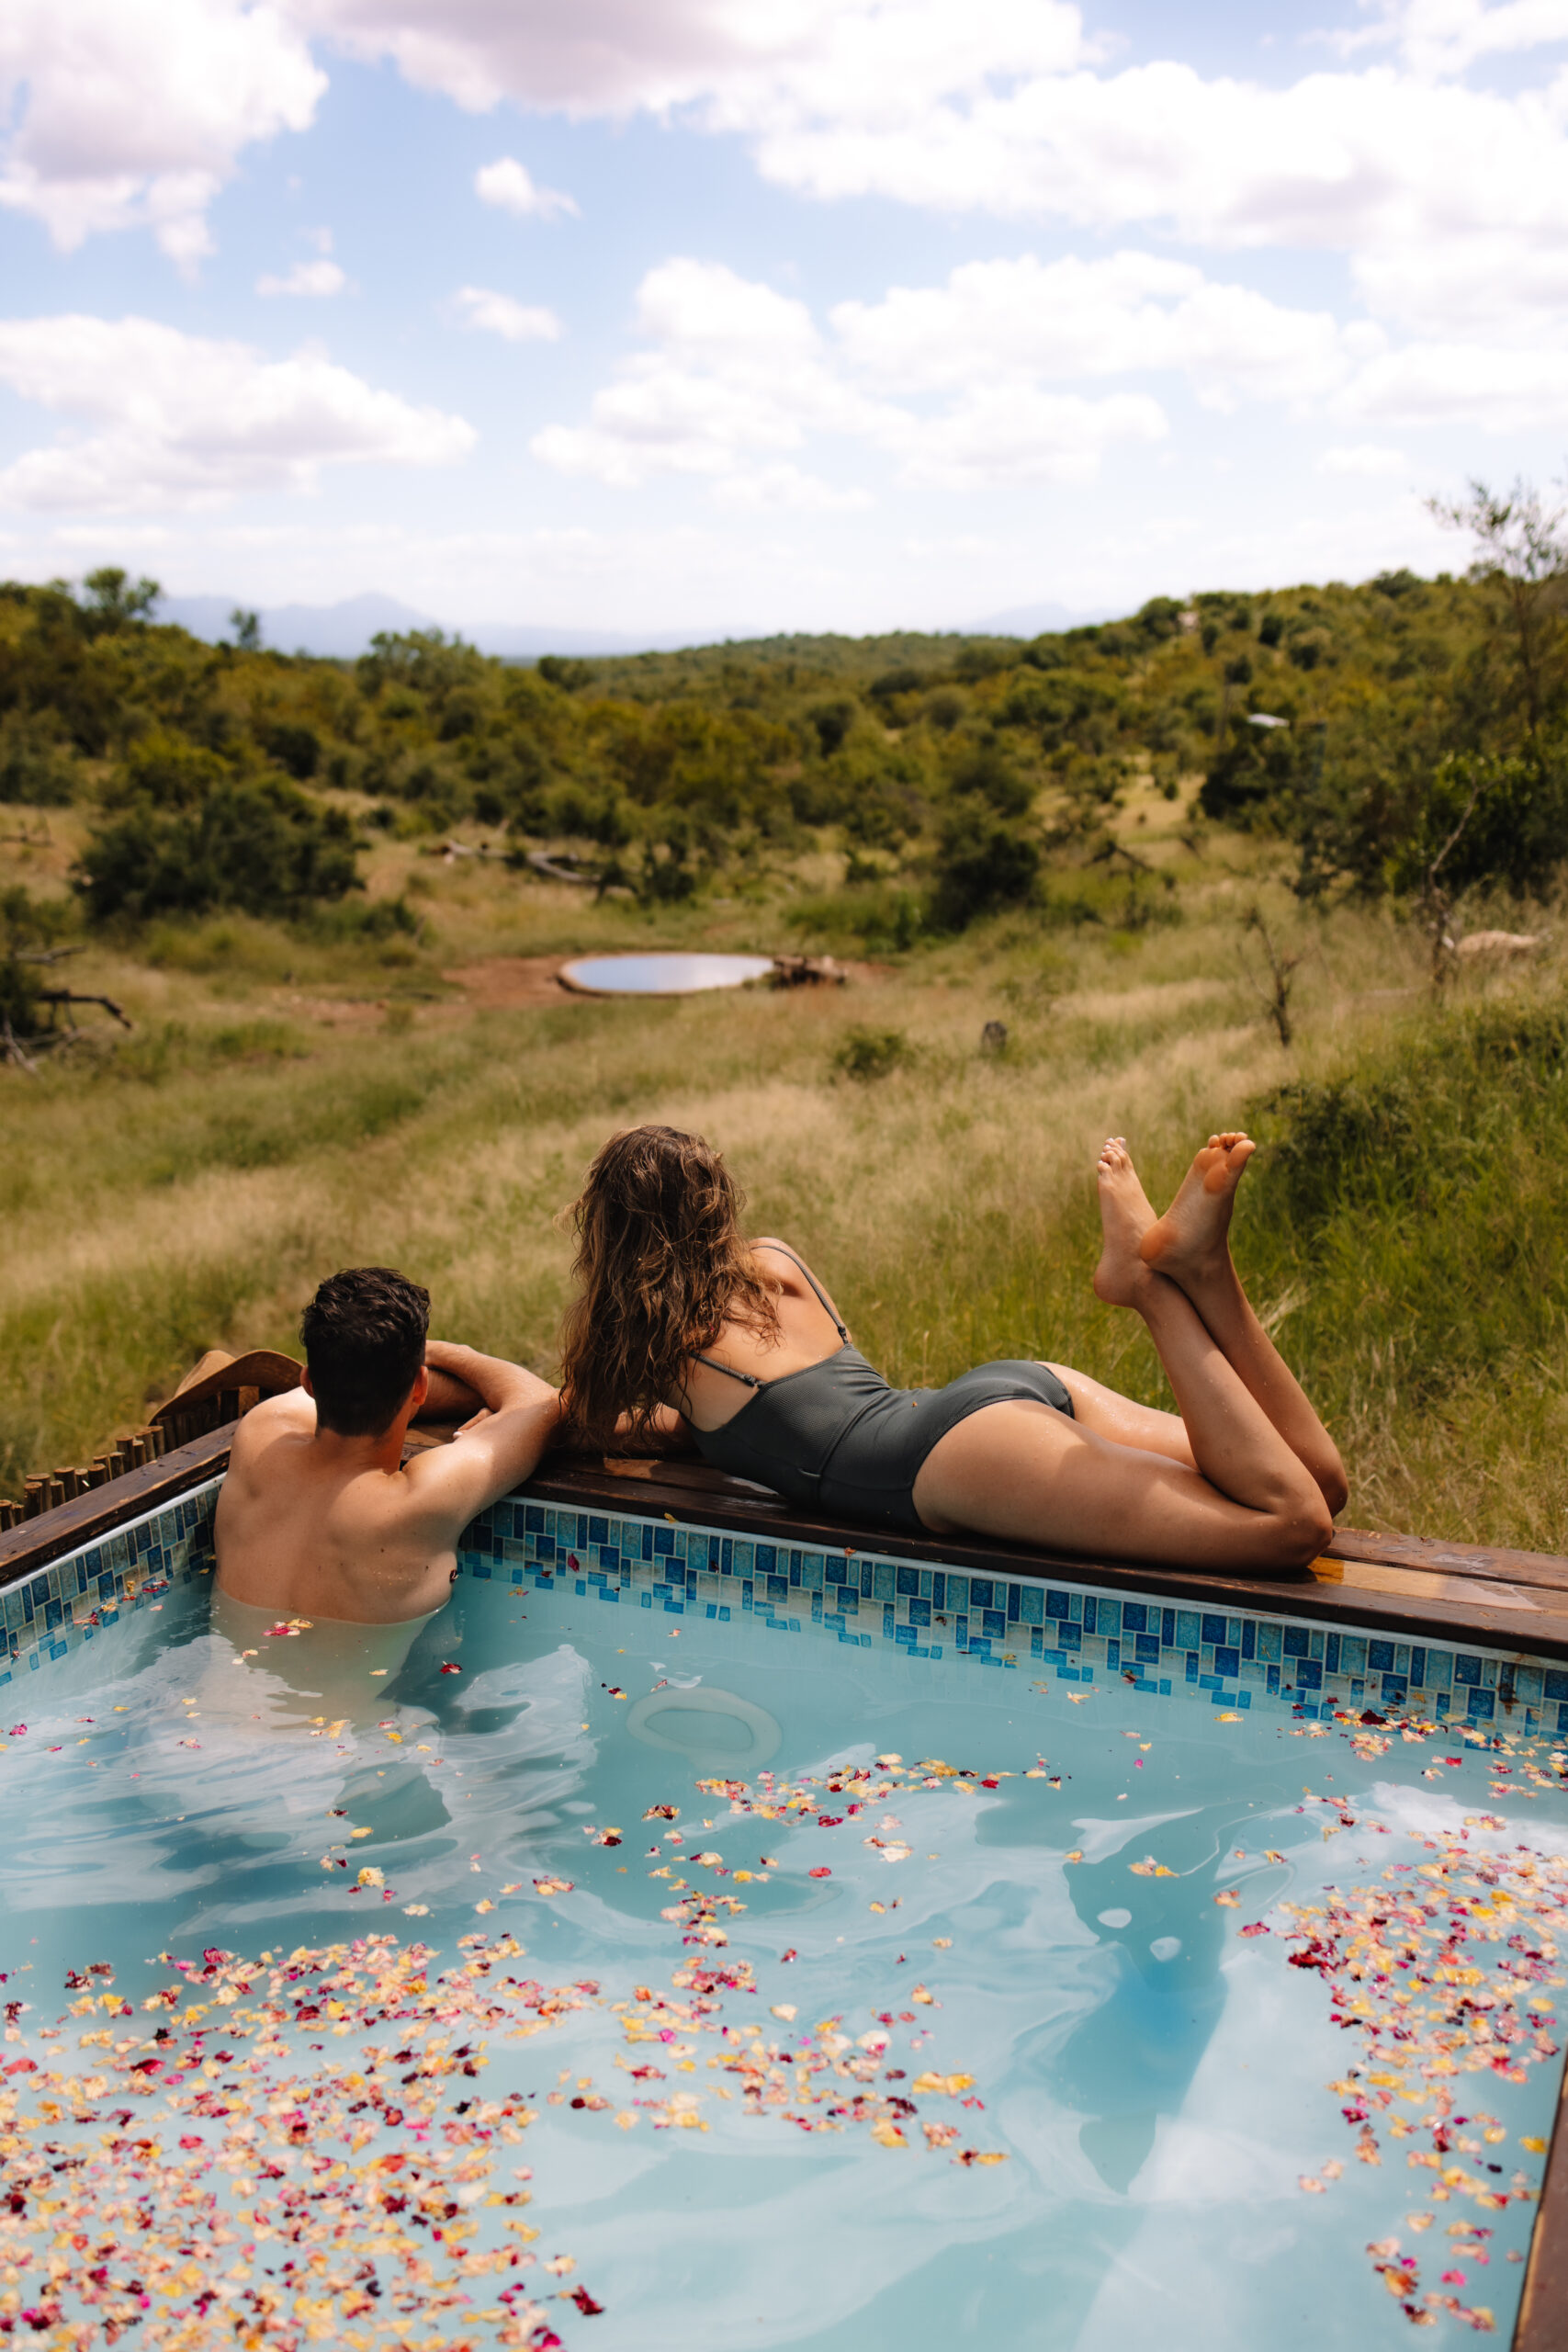 Honeymoon couple relaxing in a pool on safari after eloping at a safari lodge